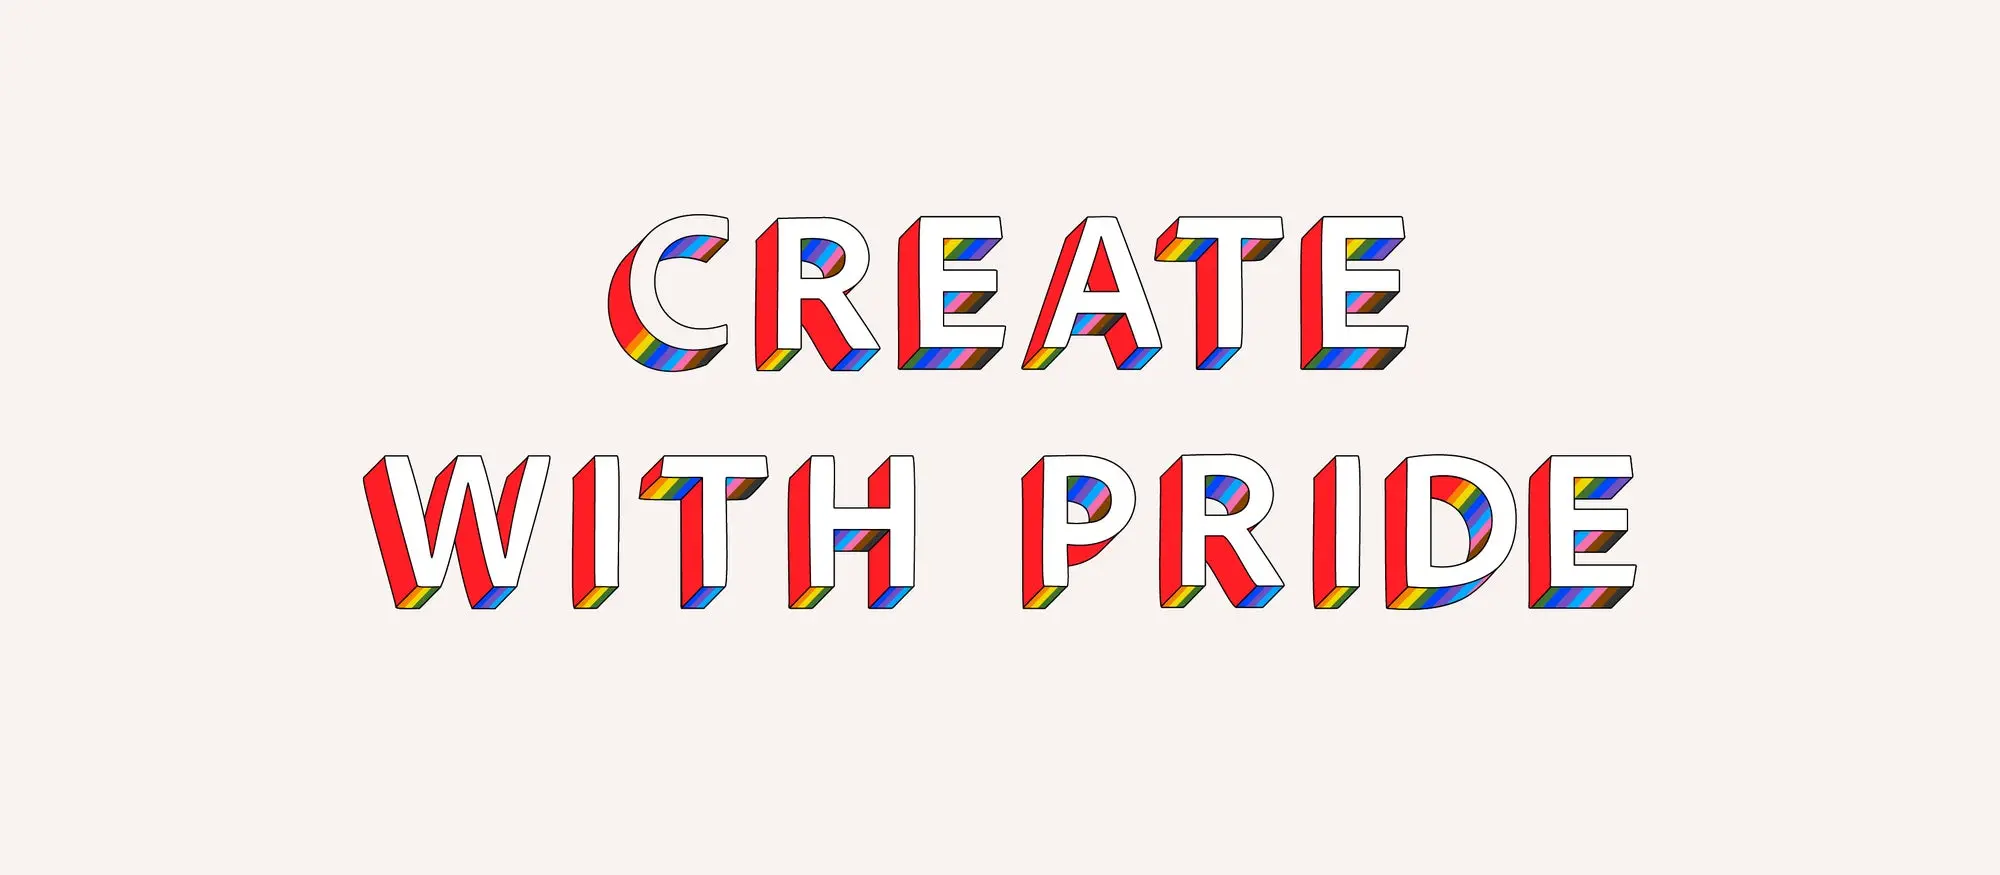 Celebrating with Pride in colorful lettering. 